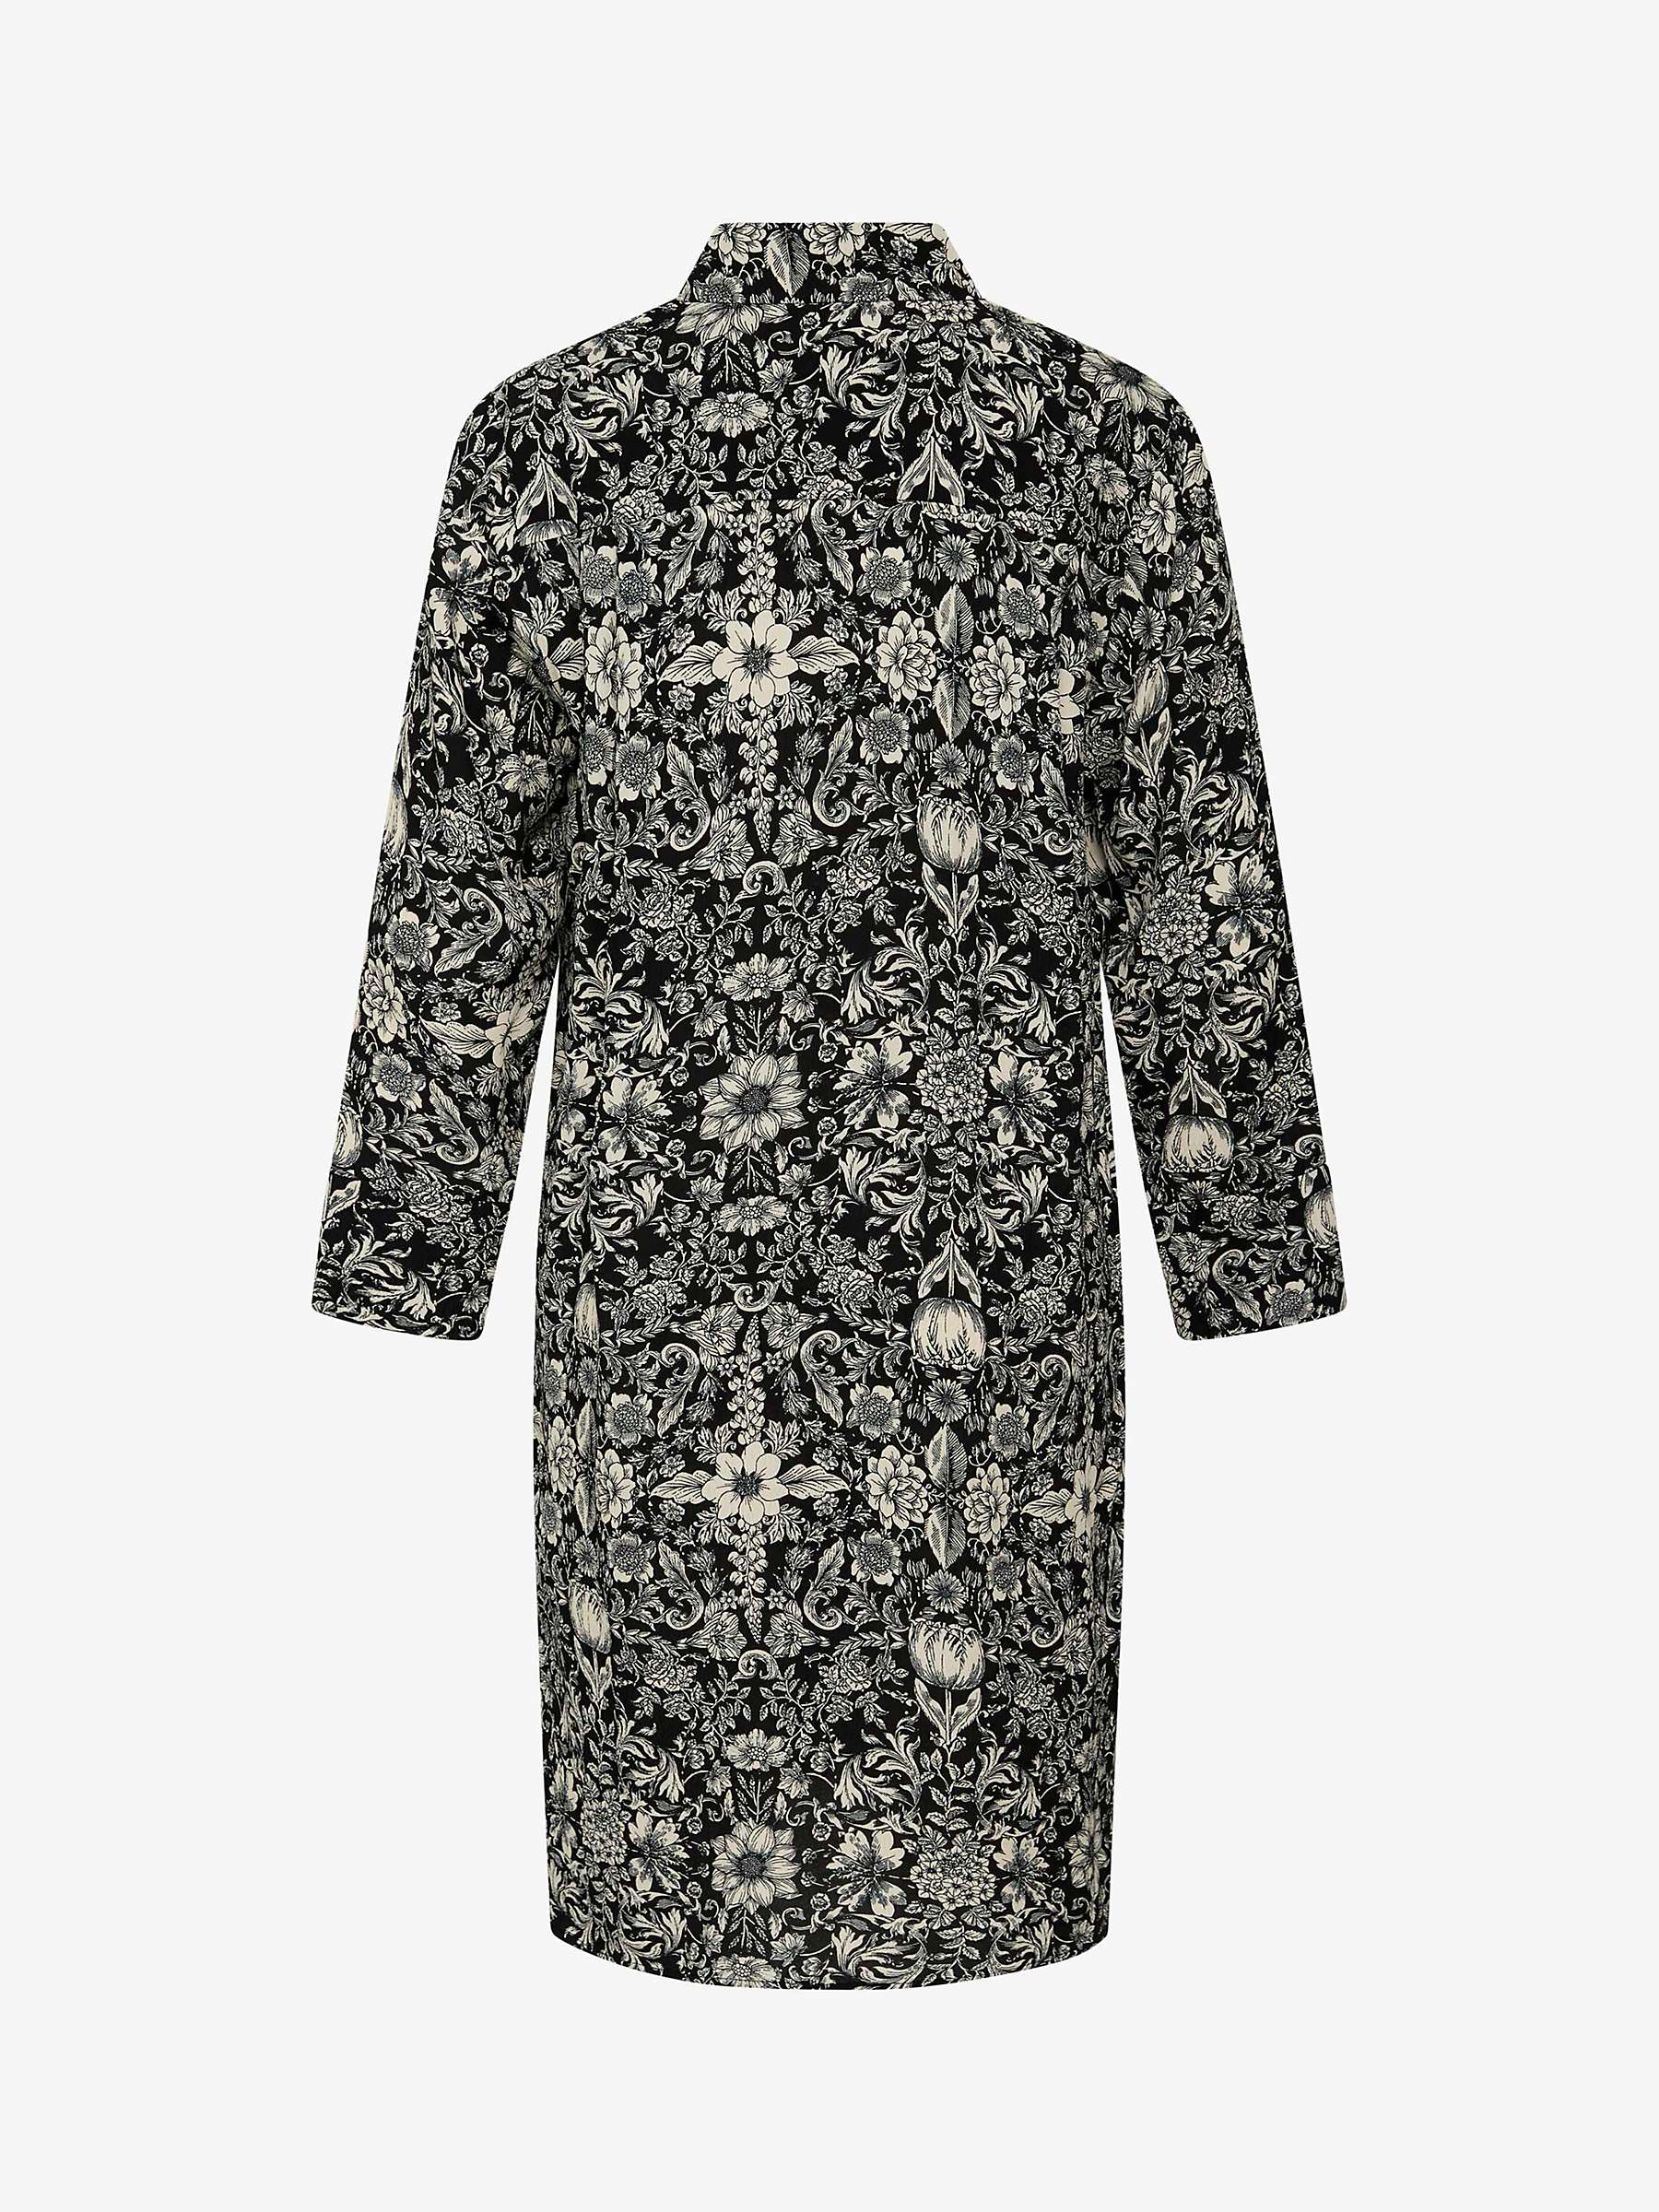 Buy Noa Noa Louise Floral Tapestry Print Tunic Dress, Black/Off White Online at johnlewis.com